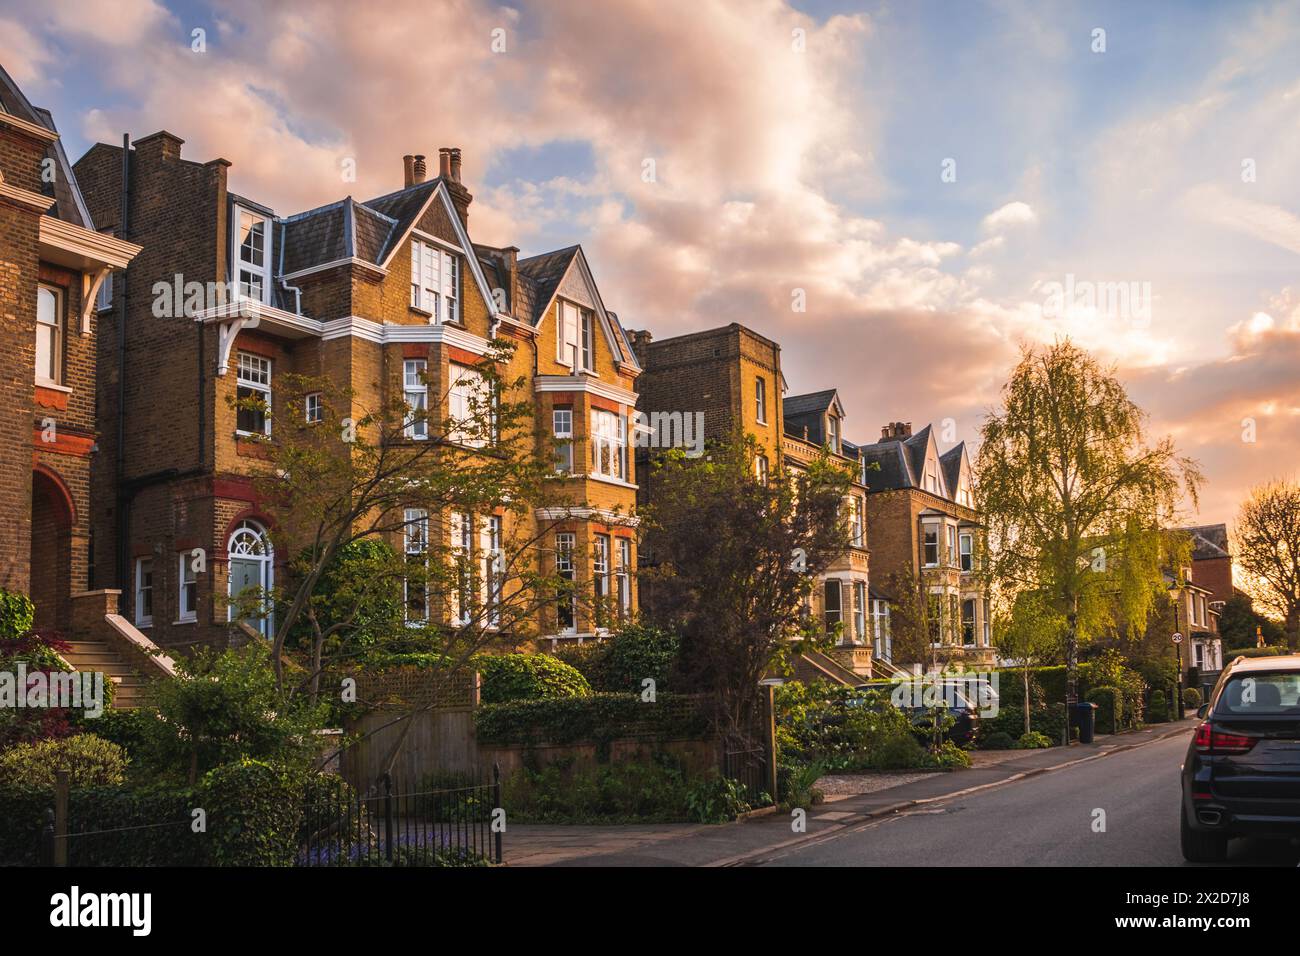 View of traditional residential street in  English town at sunset Stock Photo